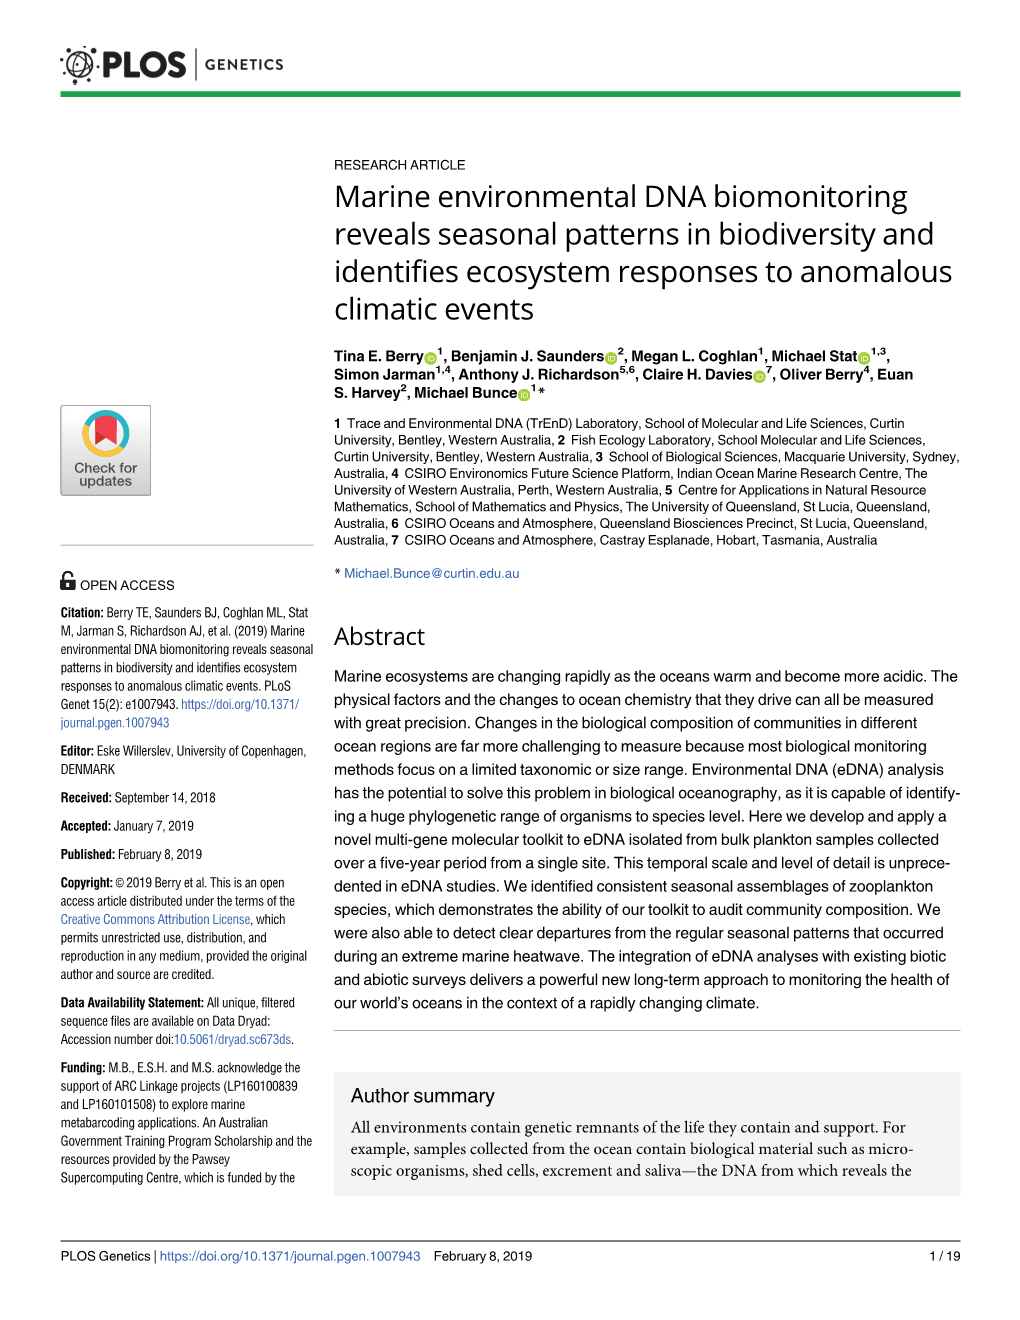 Marine Environmental DNA Biomonitoring Reveals Seasonal Patterns in Biodiversity and Identifies Ecosystem Responses to Anomalous Climatic Events